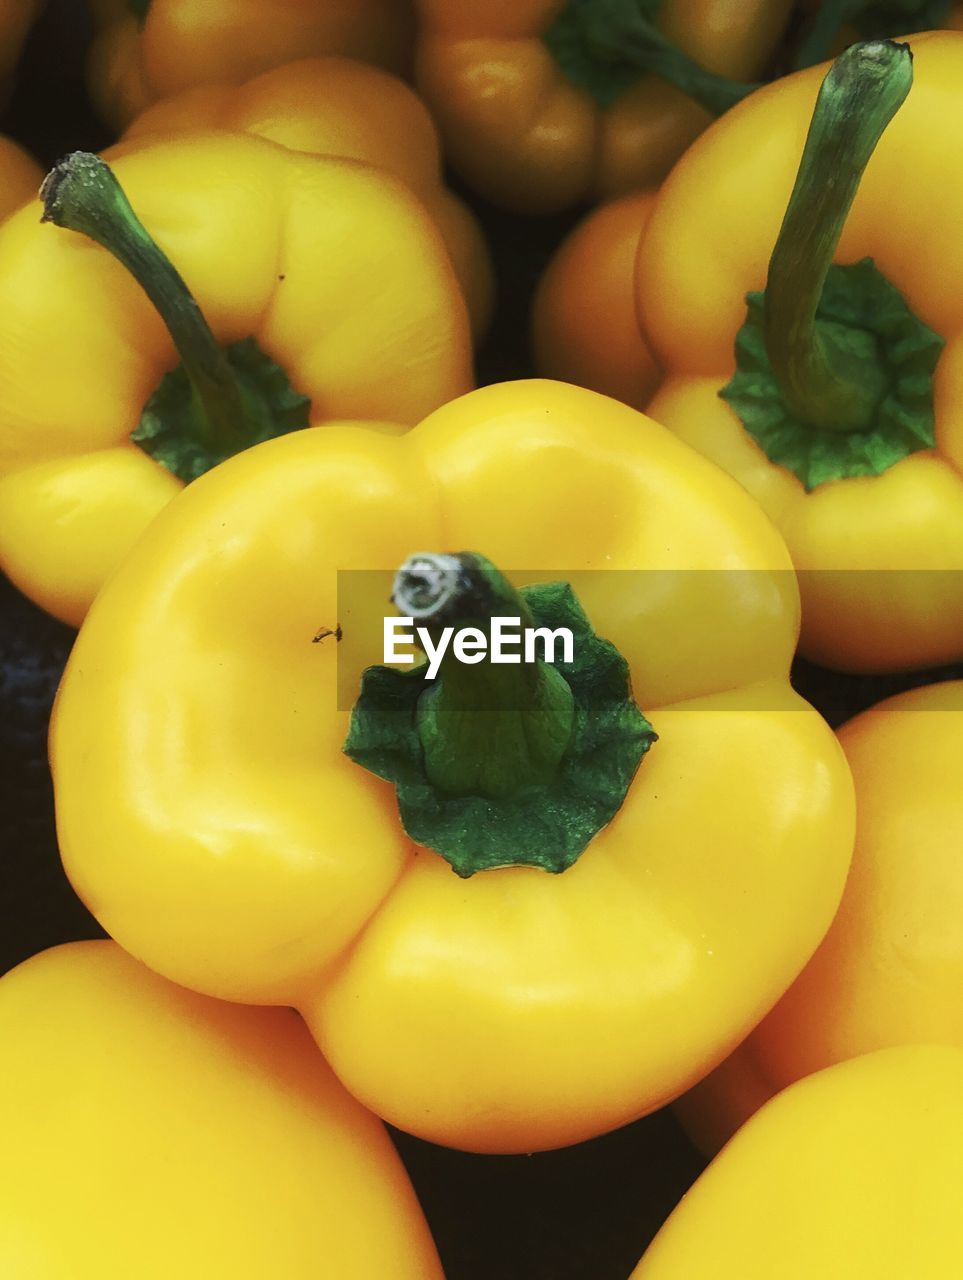 Detail shot of yellow bell peppers